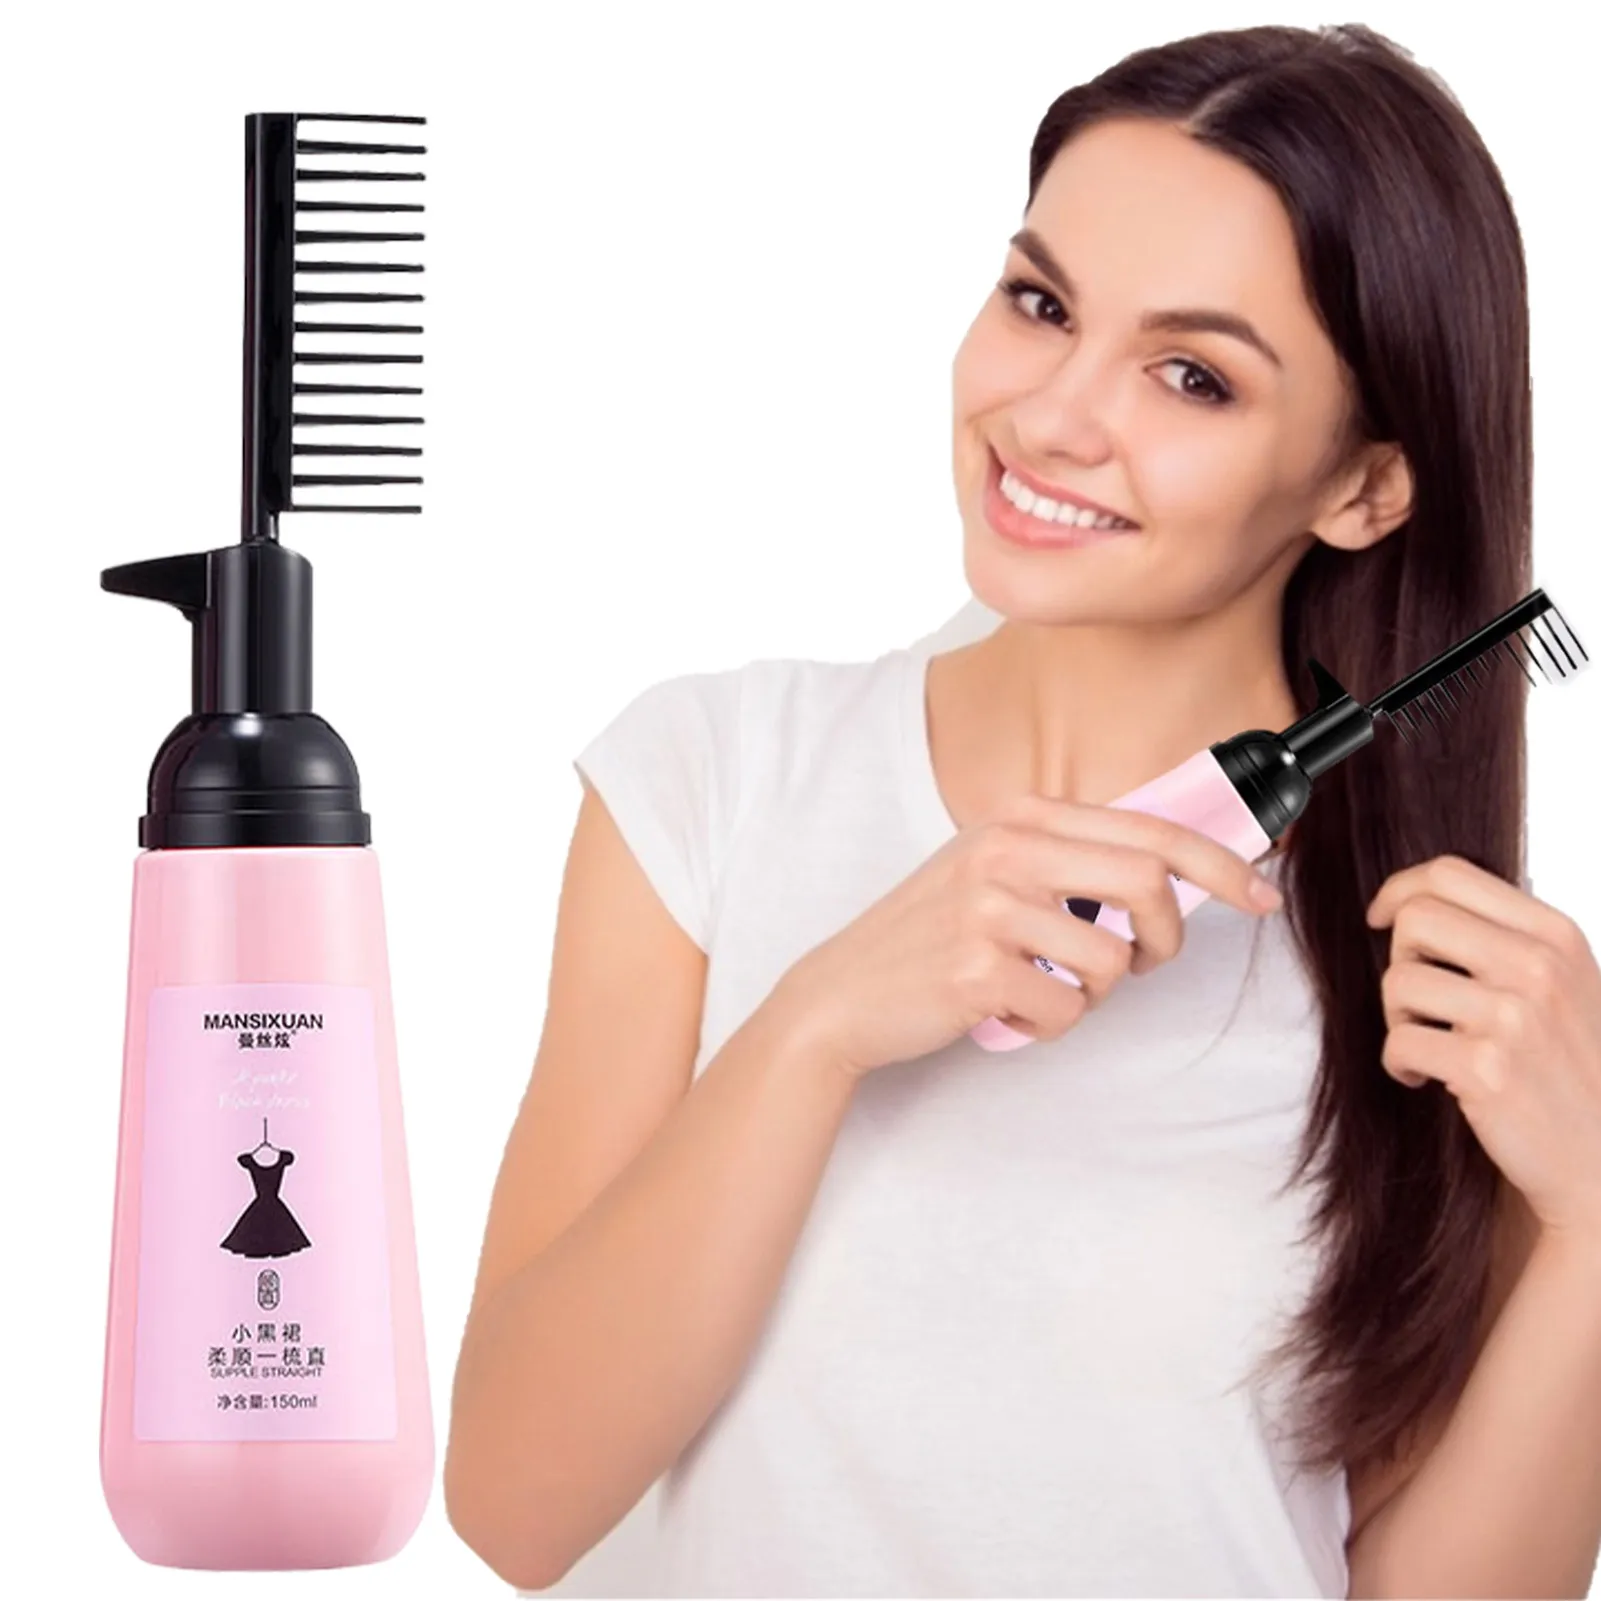 

Hair Straightening Cream 2-in-1 Hair Straightening Cream With A Built-in Styling Comb Silk Hair Cream For Curly Hair Light